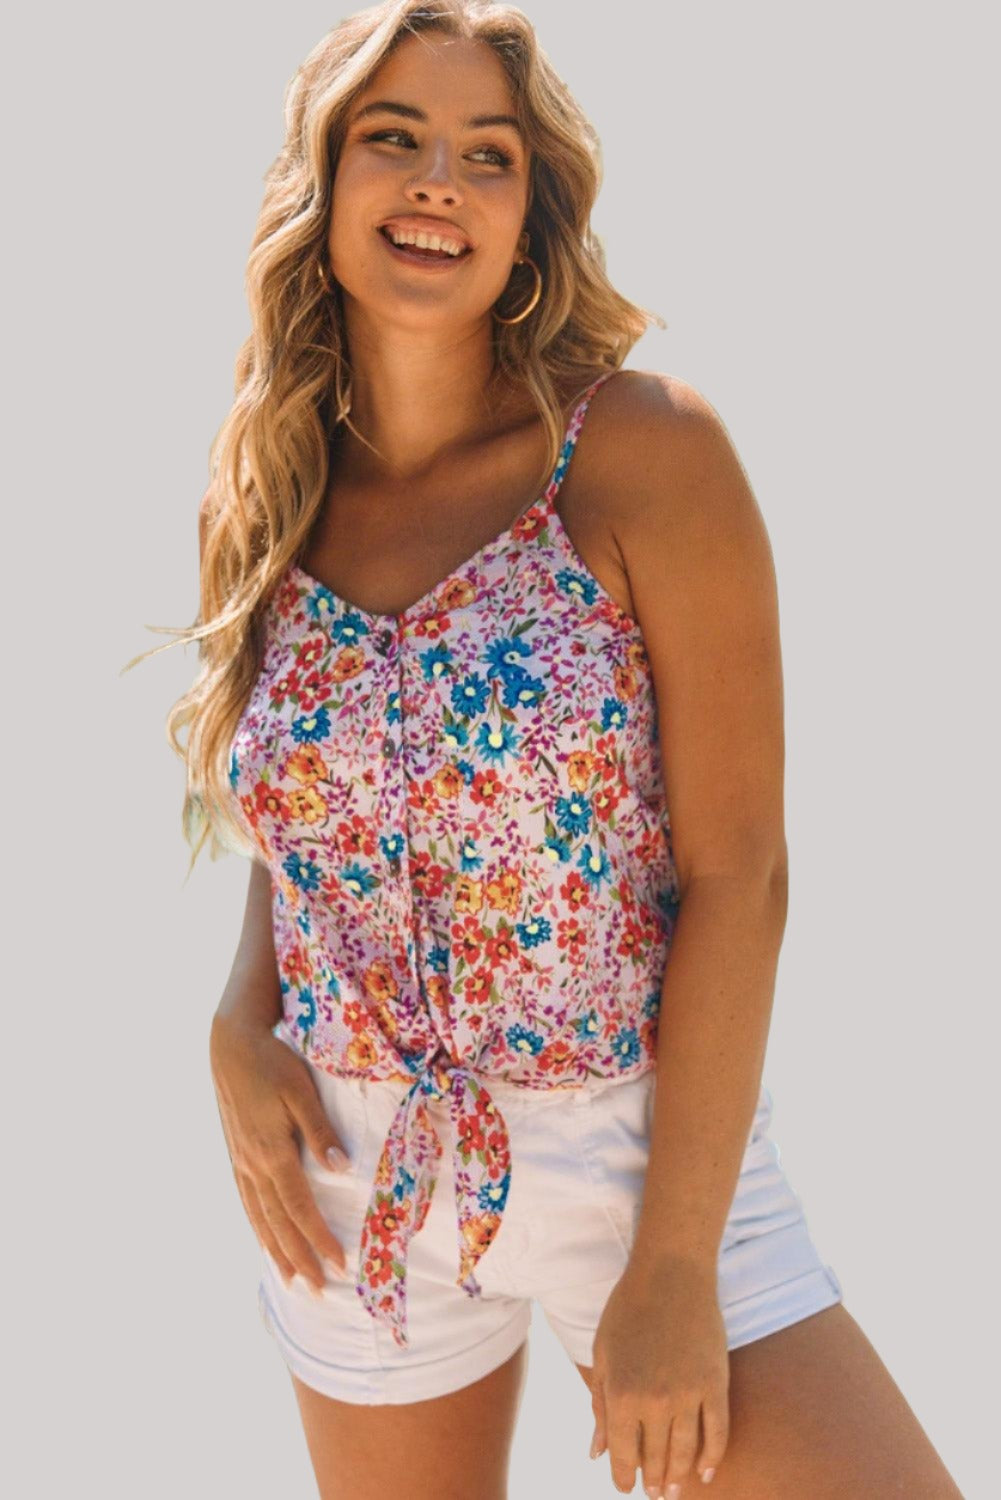 Sleeveless Summer Spaghetti Straps Floral Tank Top for Ladies